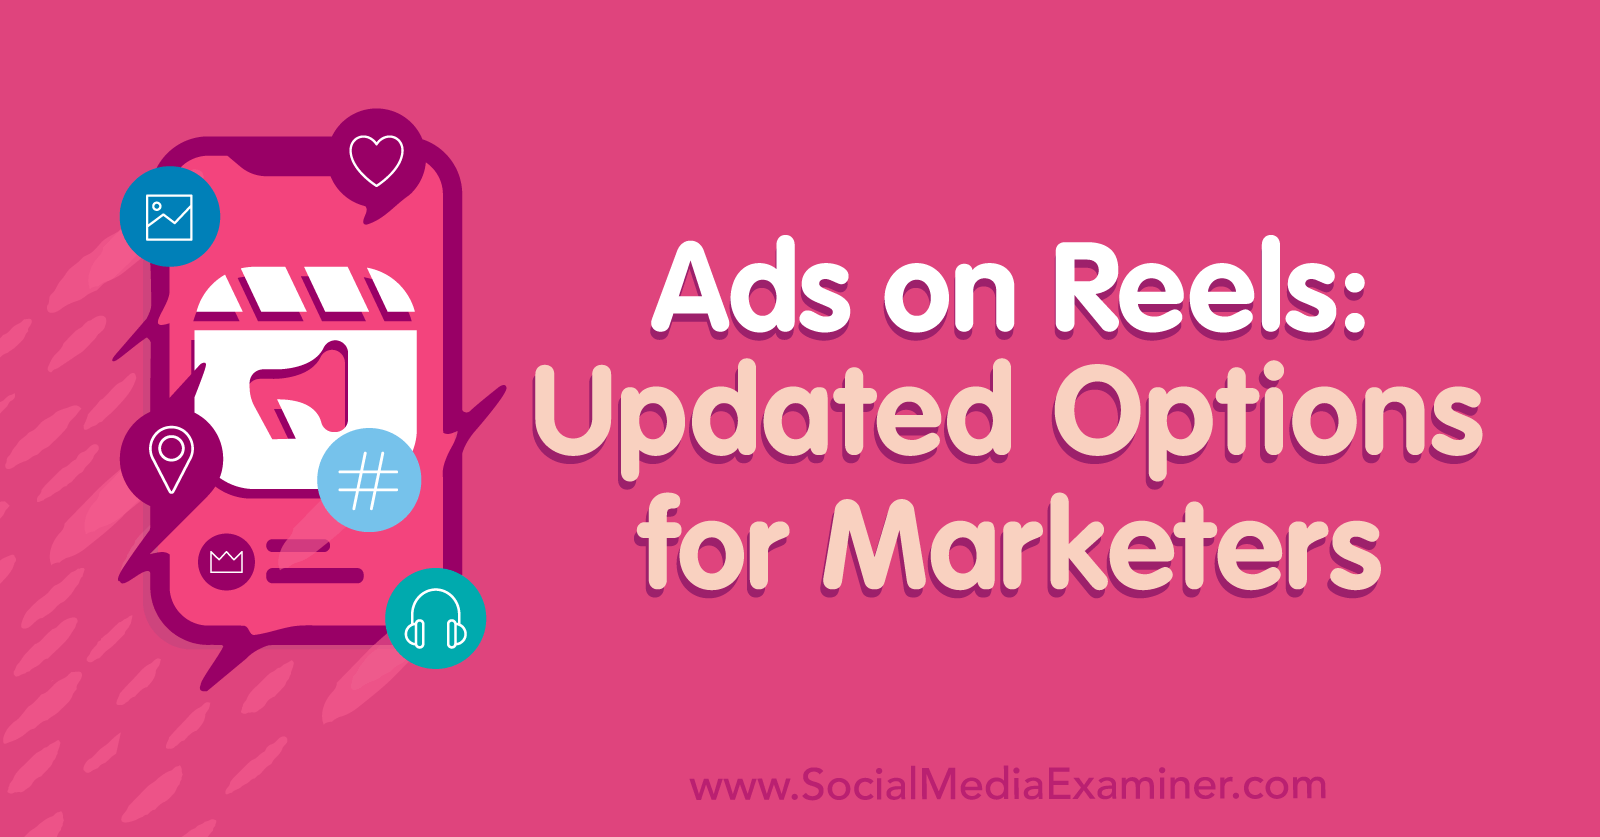 Ads on Reels: Updated Options for Marketers : Social Media Examiner